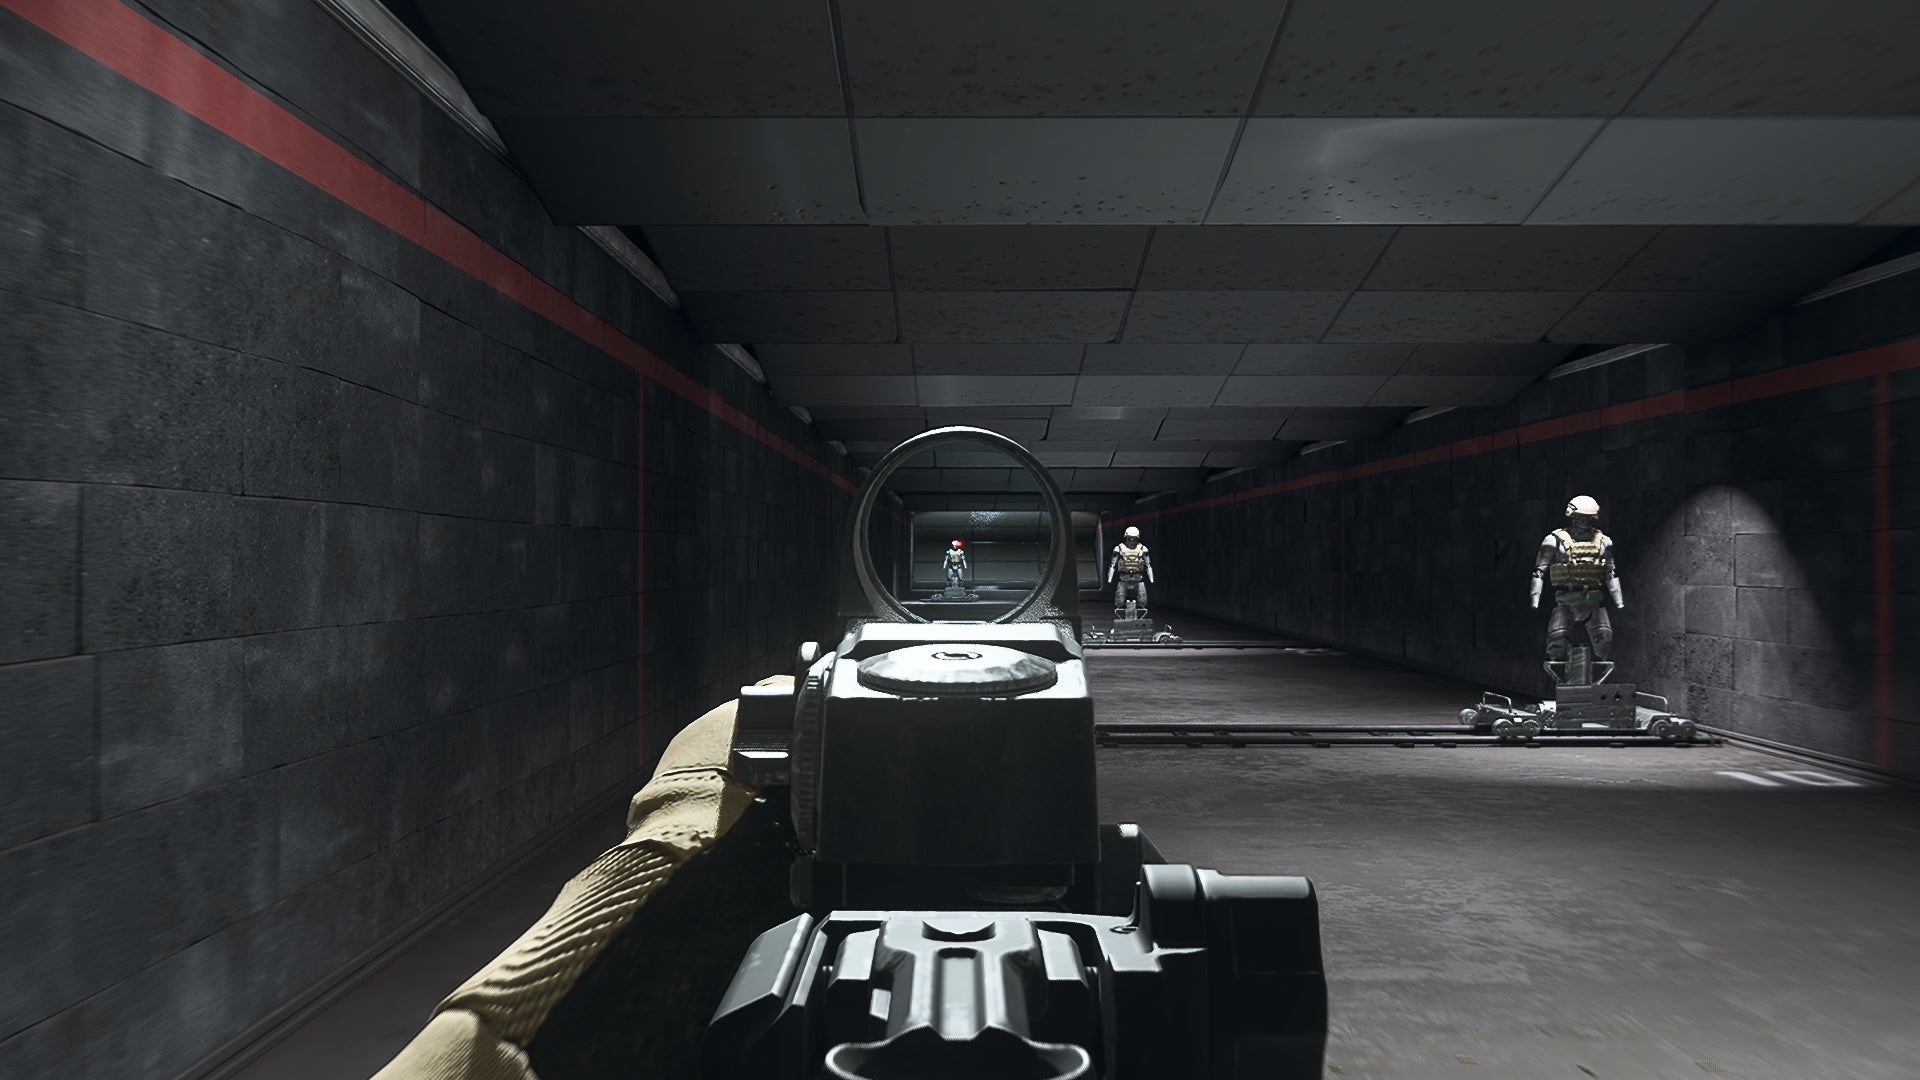 The player in Warzone 2.0 aims at a training dummy using the DF105 Reflex Sight optic attachment.